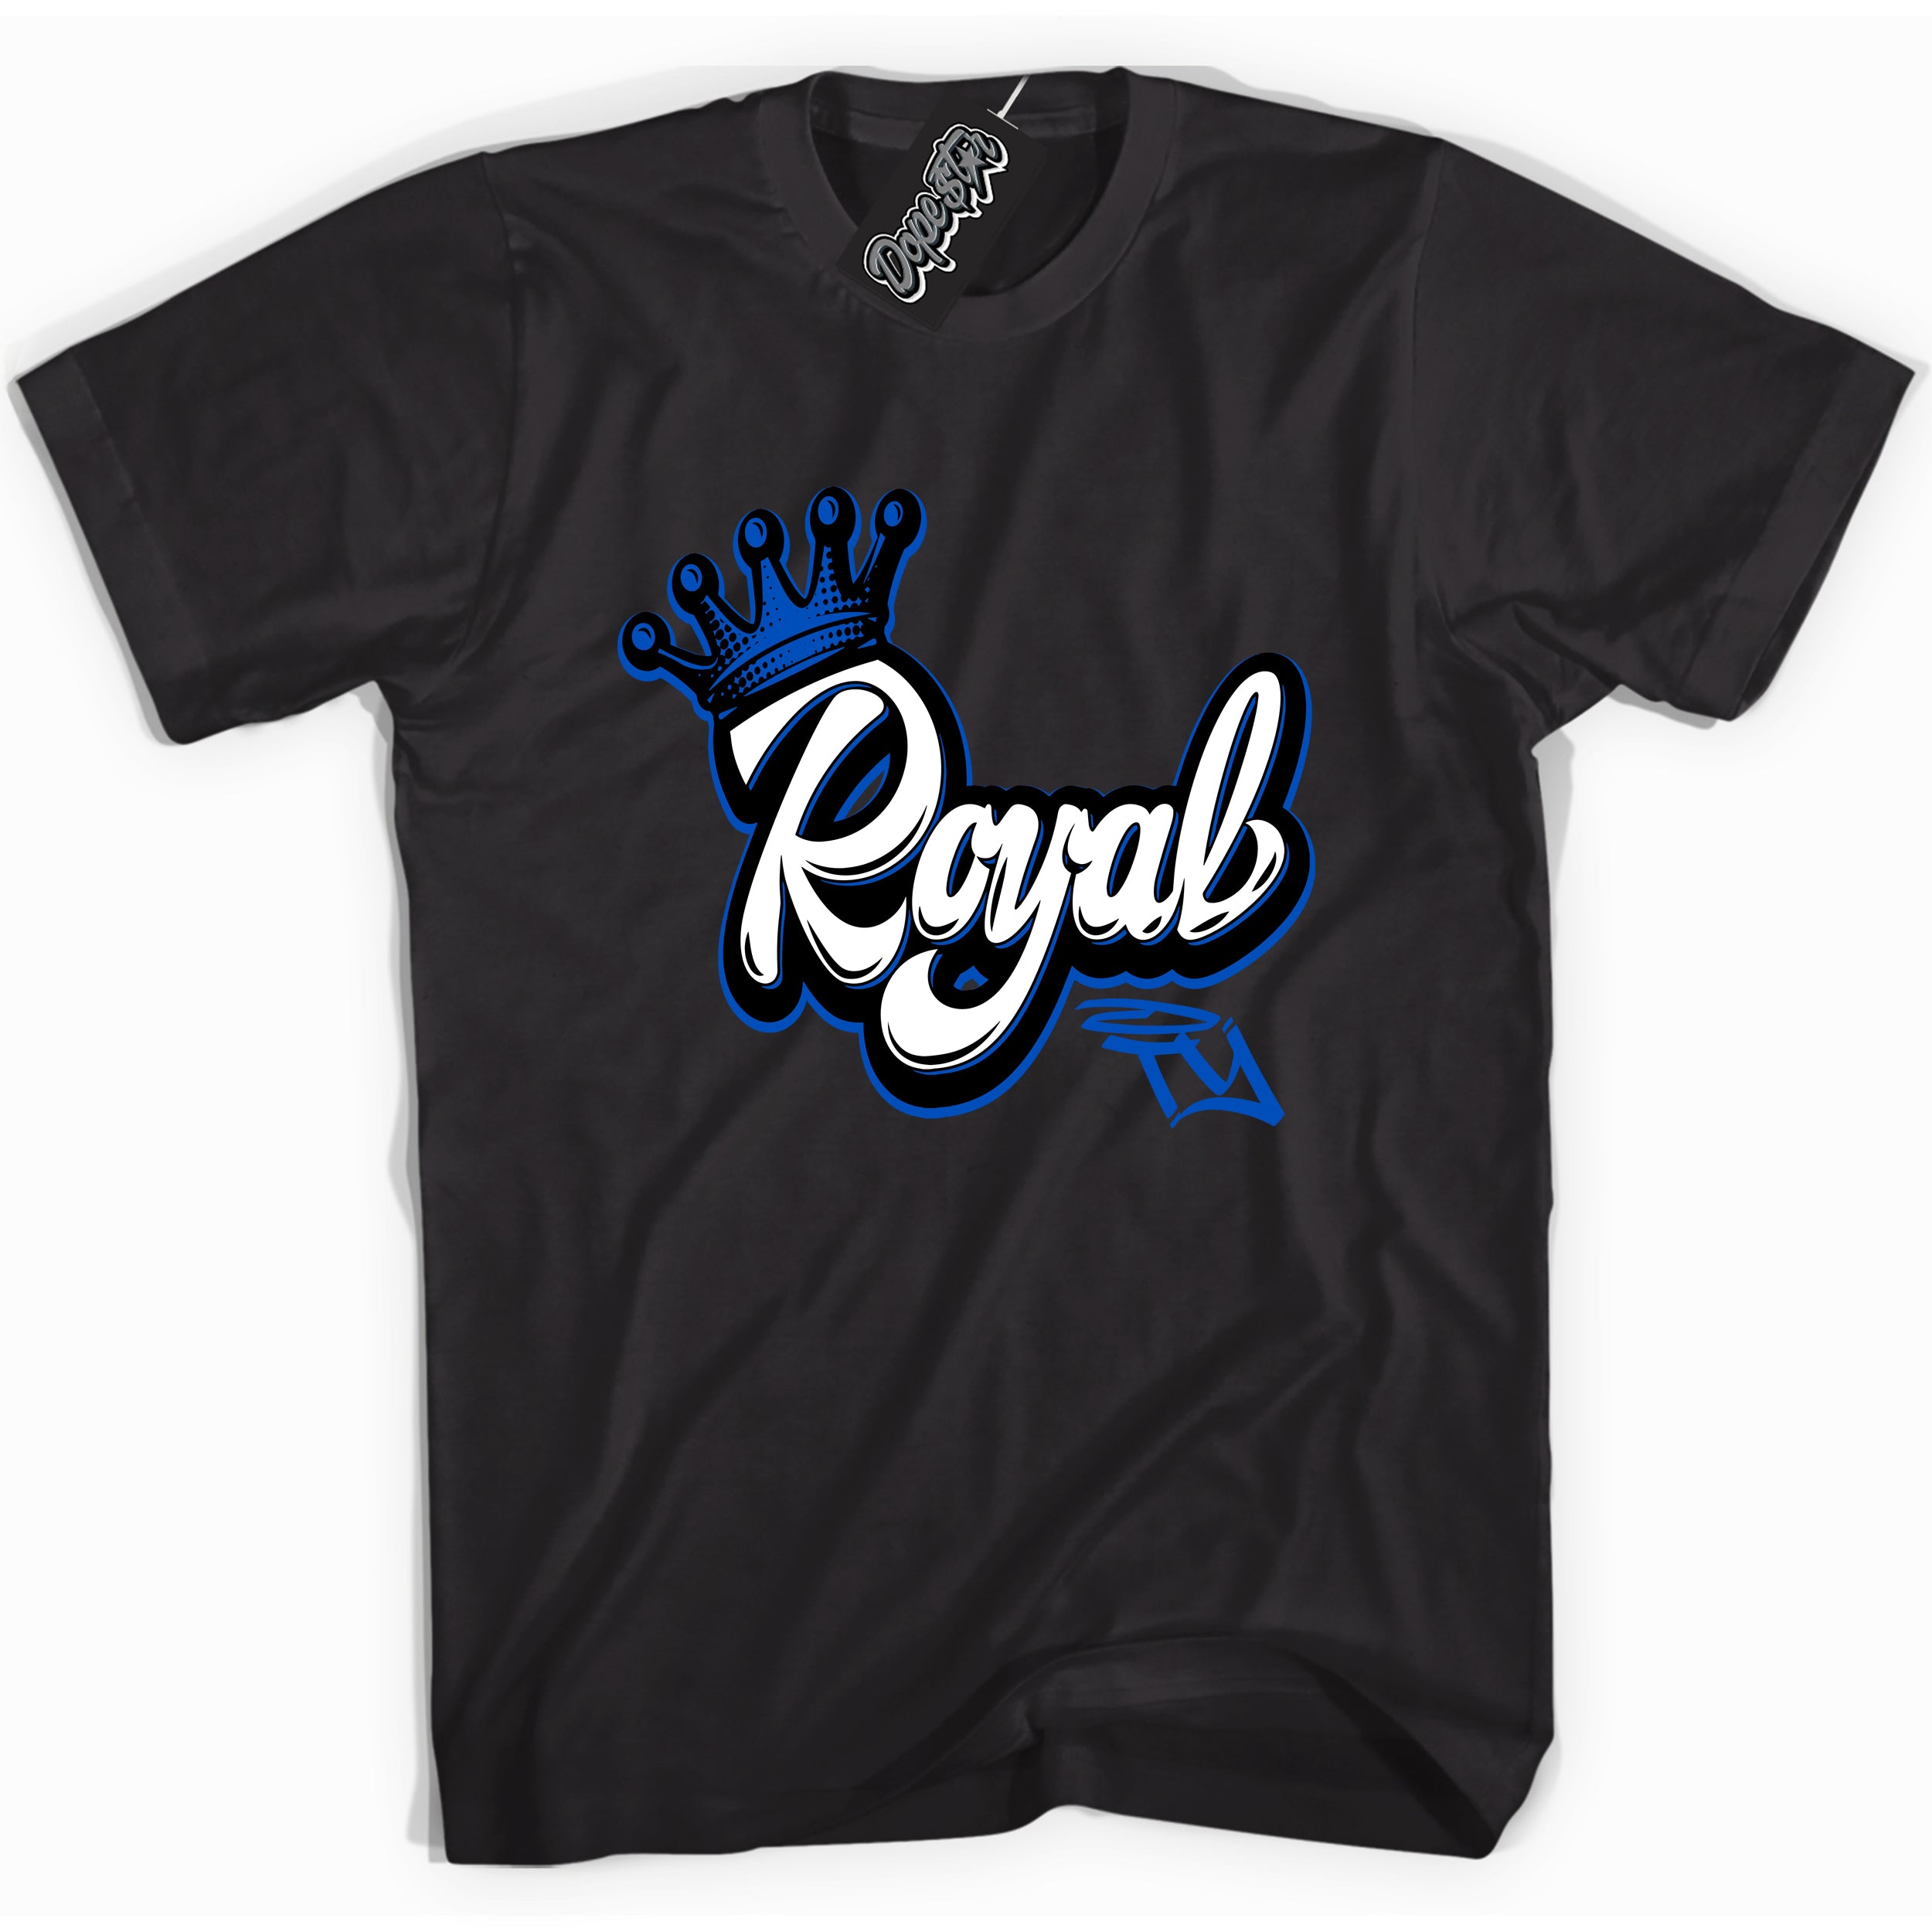 Cool Black graphic tee with "Royal" design, that perfectly matches Royal Reimagined 1s sneakers 